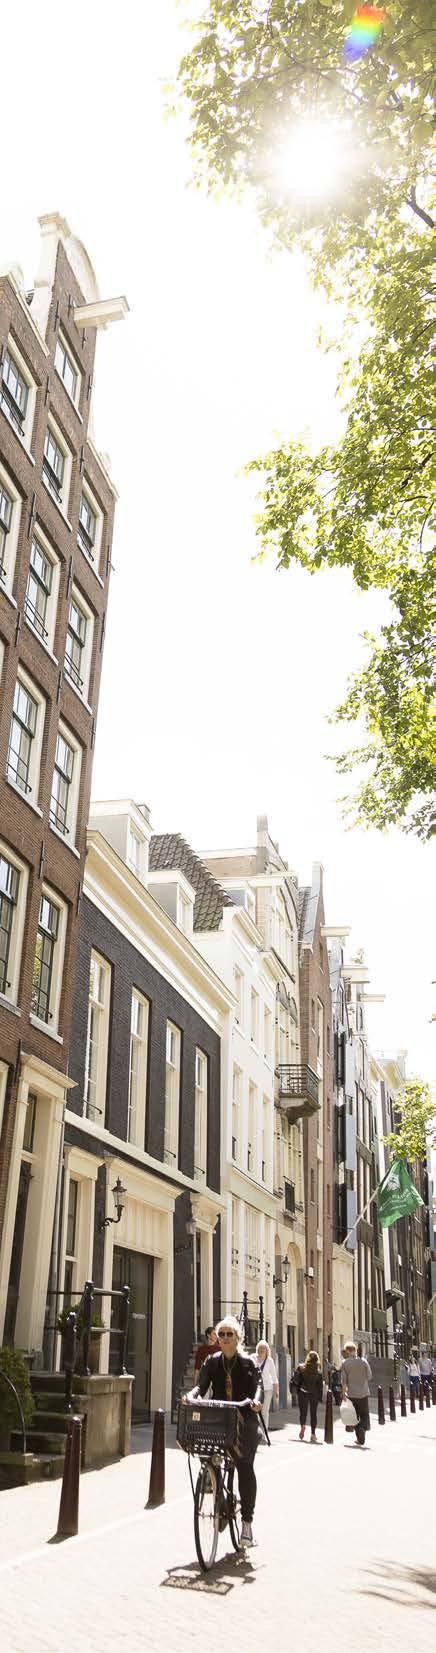 Explore every day Amsterdam 11 Golden Age canals lined by tilting gabled buildings are the backdrop for Amsterdam s treasure-packed museums, vintage-filled shops and hyper-creative